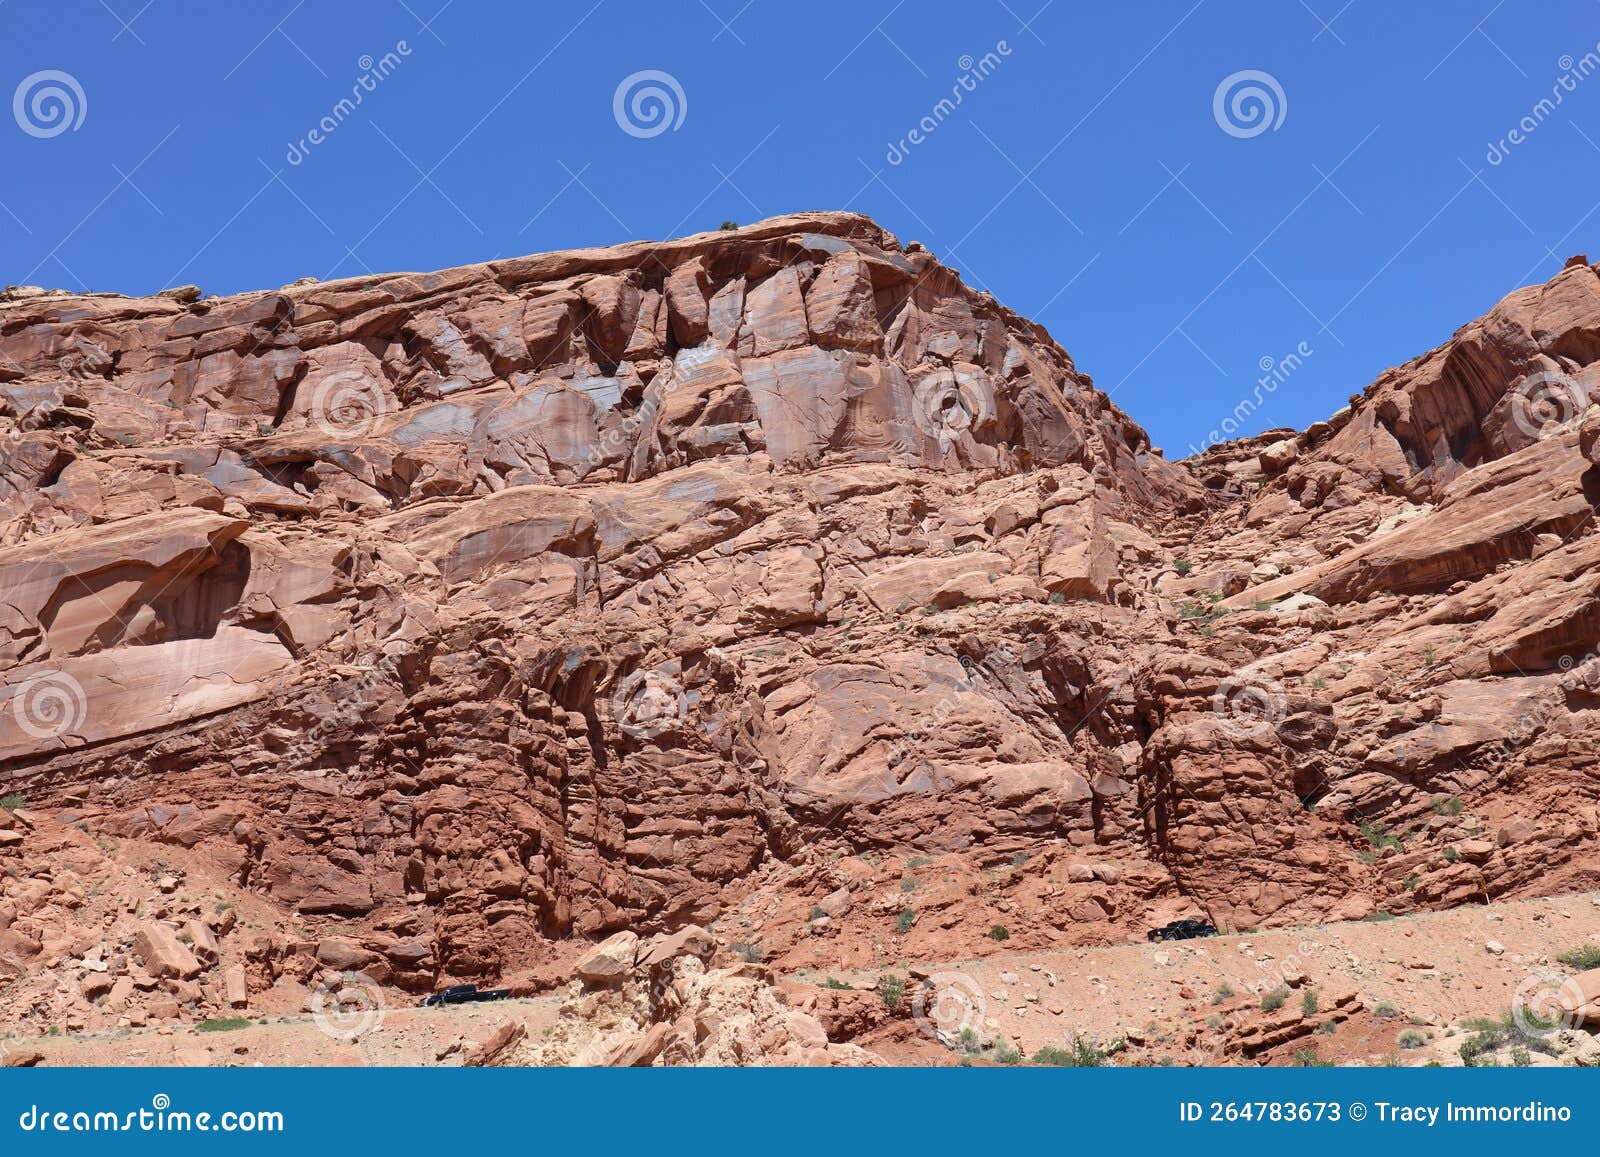 layers of entrada sandstone behind the road leading into arches national park contrasted against a clear, blue sky